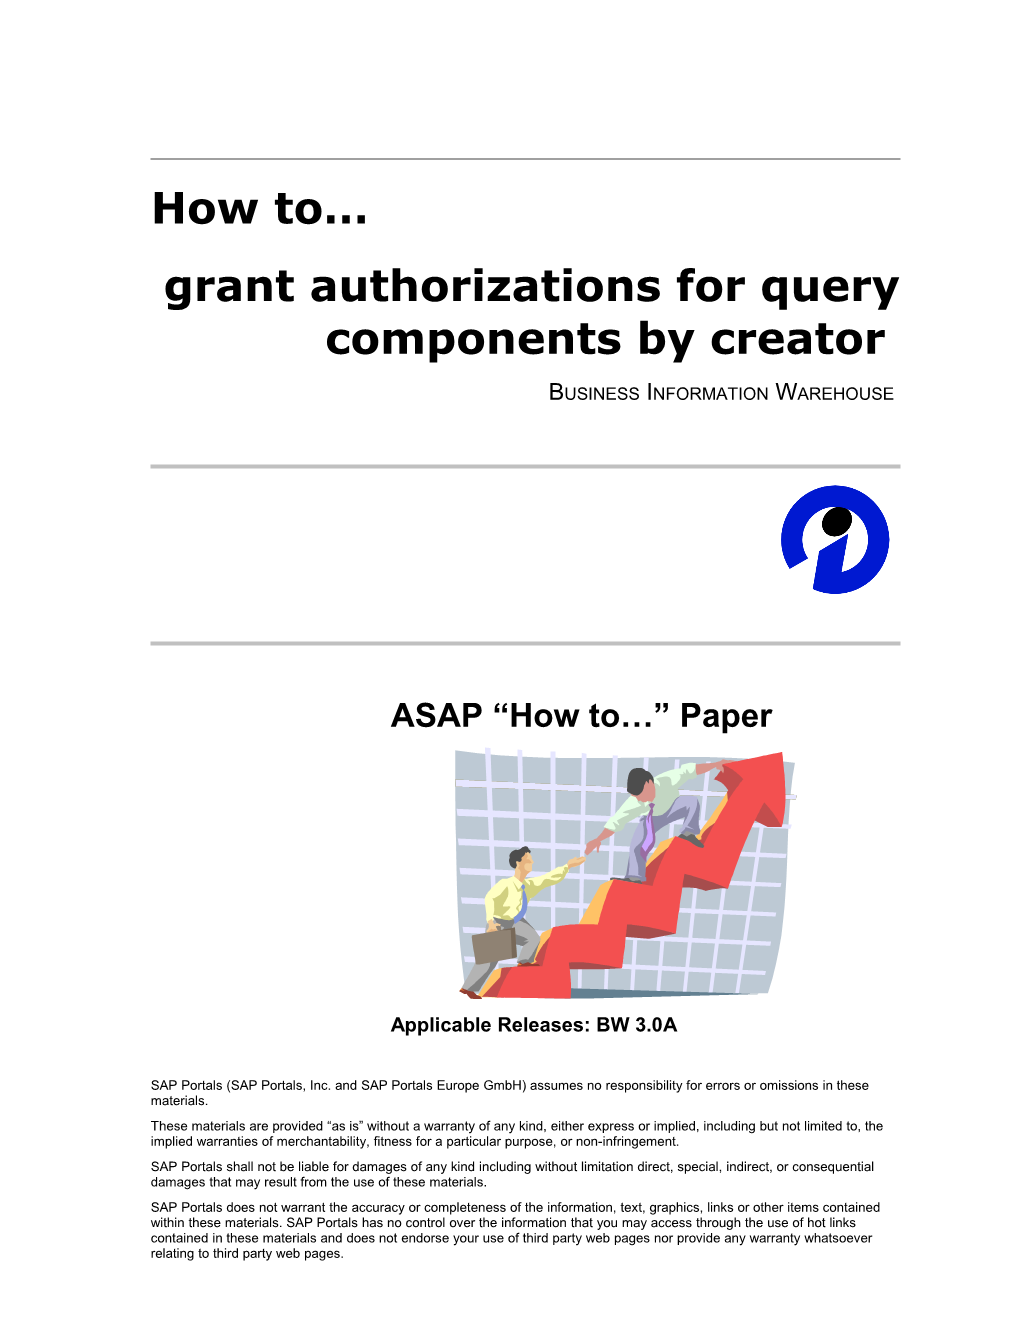 How to Grant Authorizations for Query Components by Creator